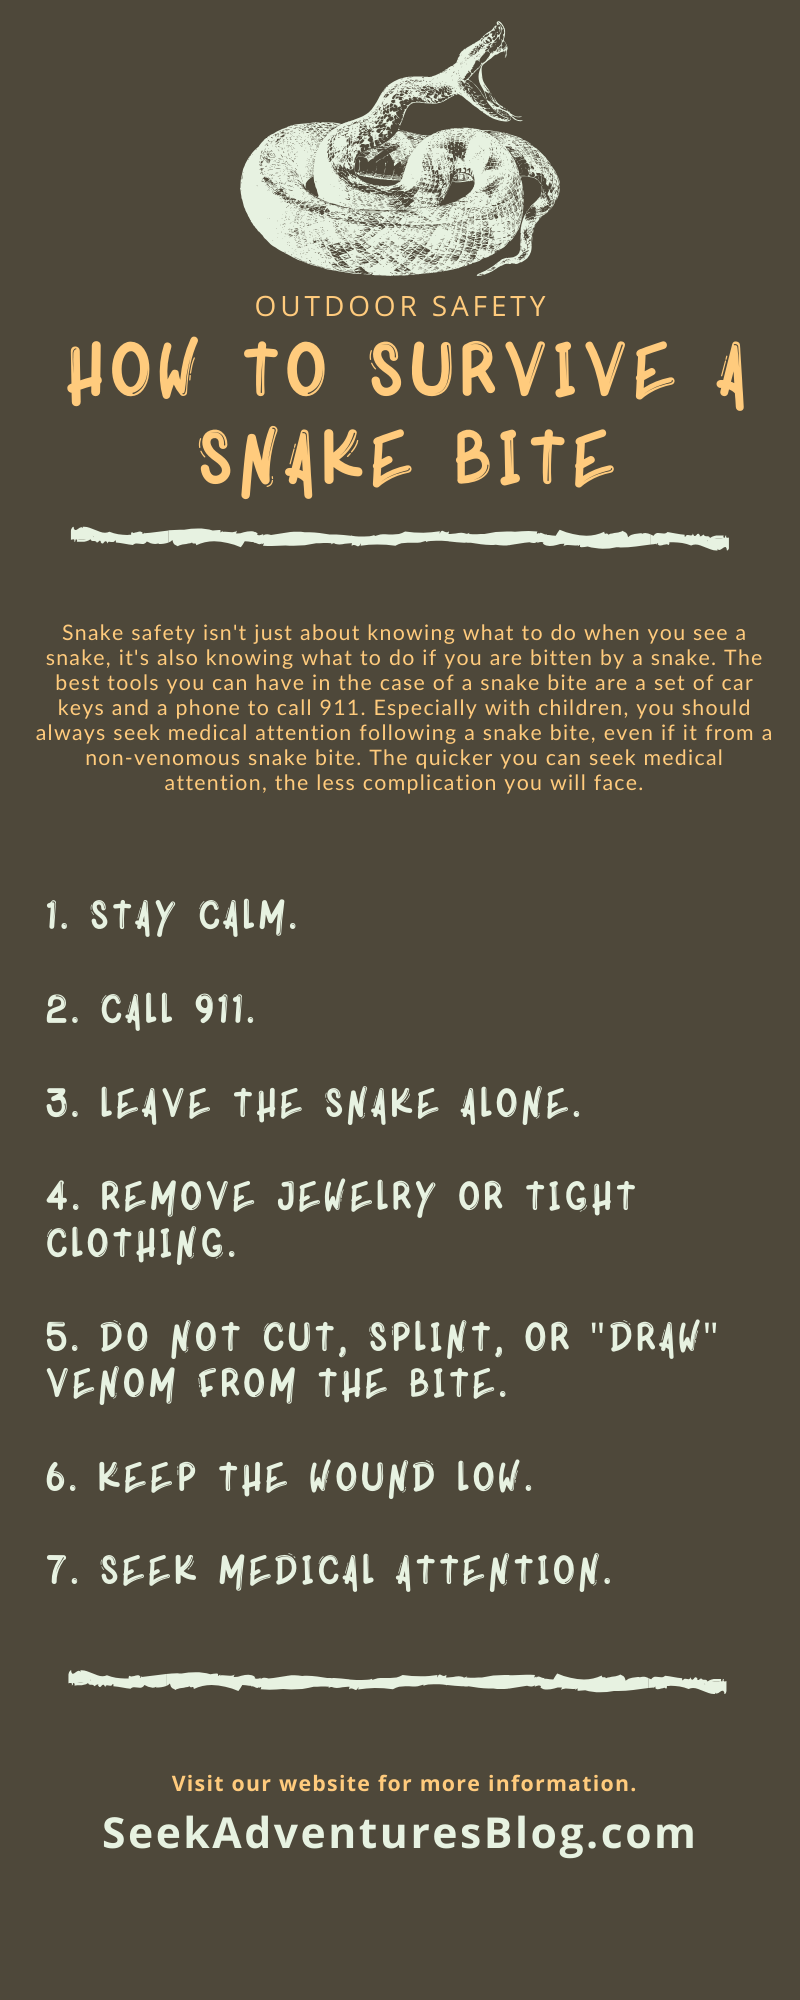 Infographic with seven tips on how to survive a snake bite